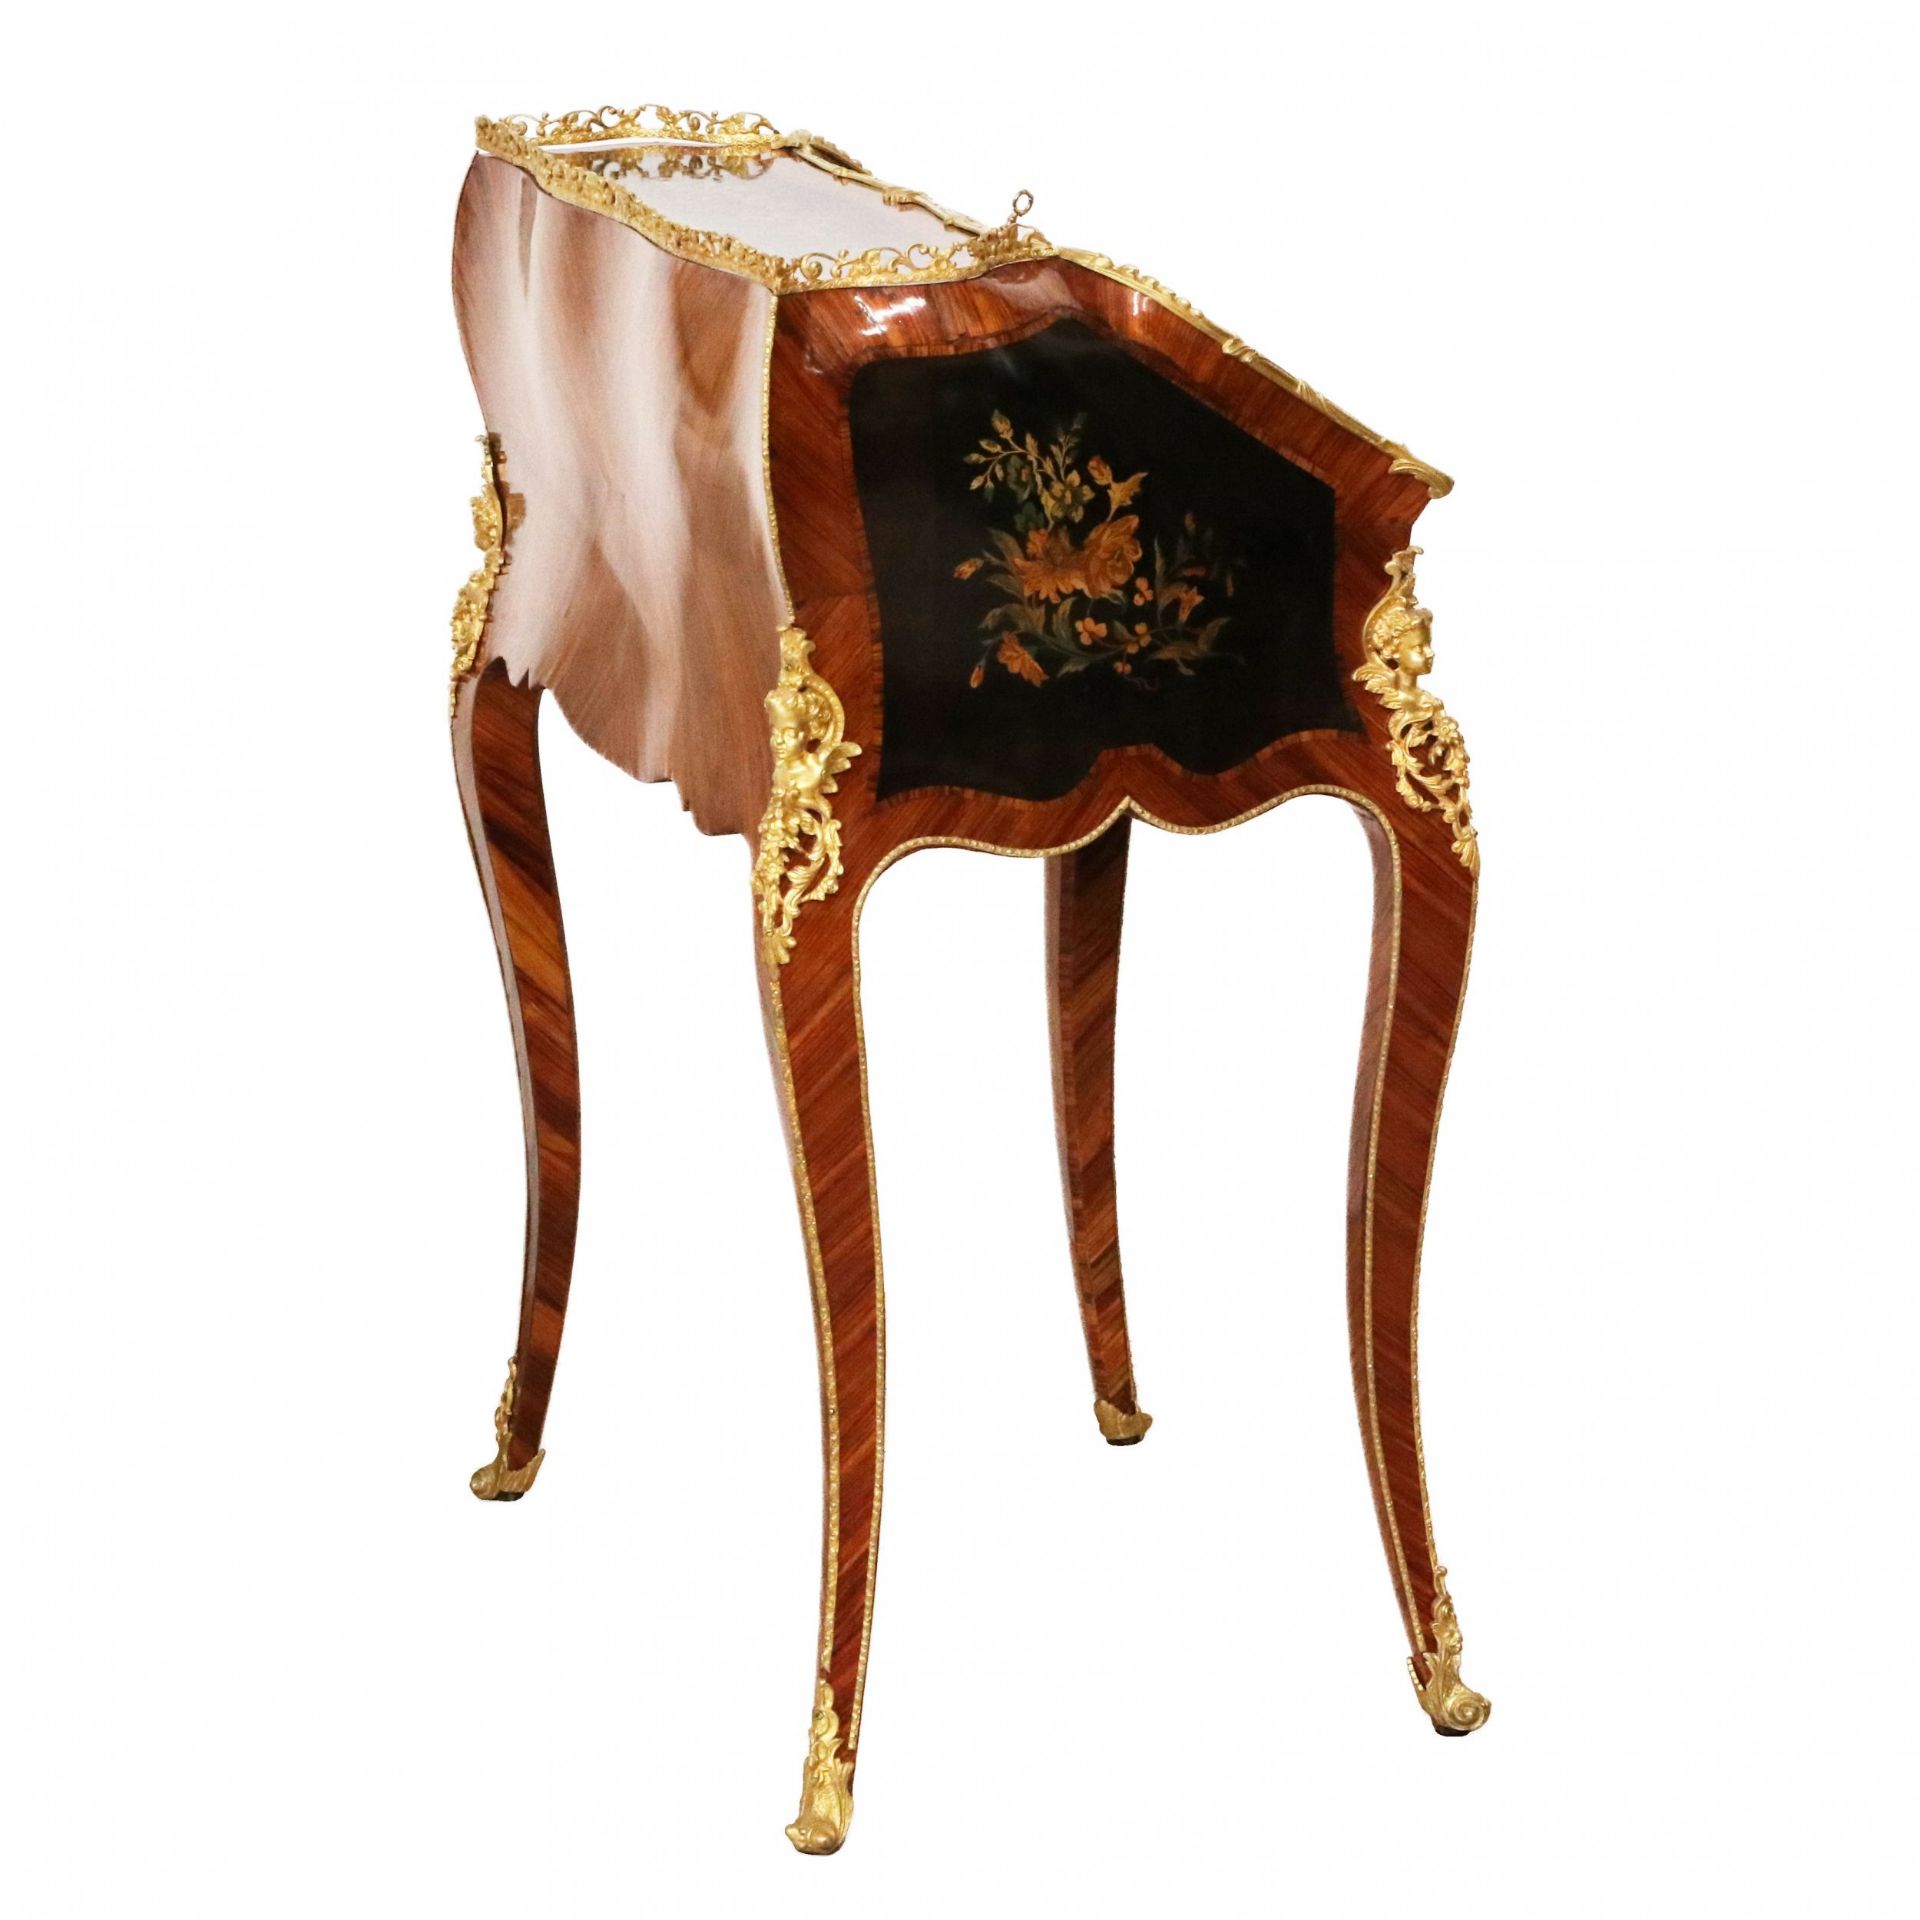 Coquettish ladies` bureau in wood and gilded bronze, Louis XV style. - Image 6 of 11